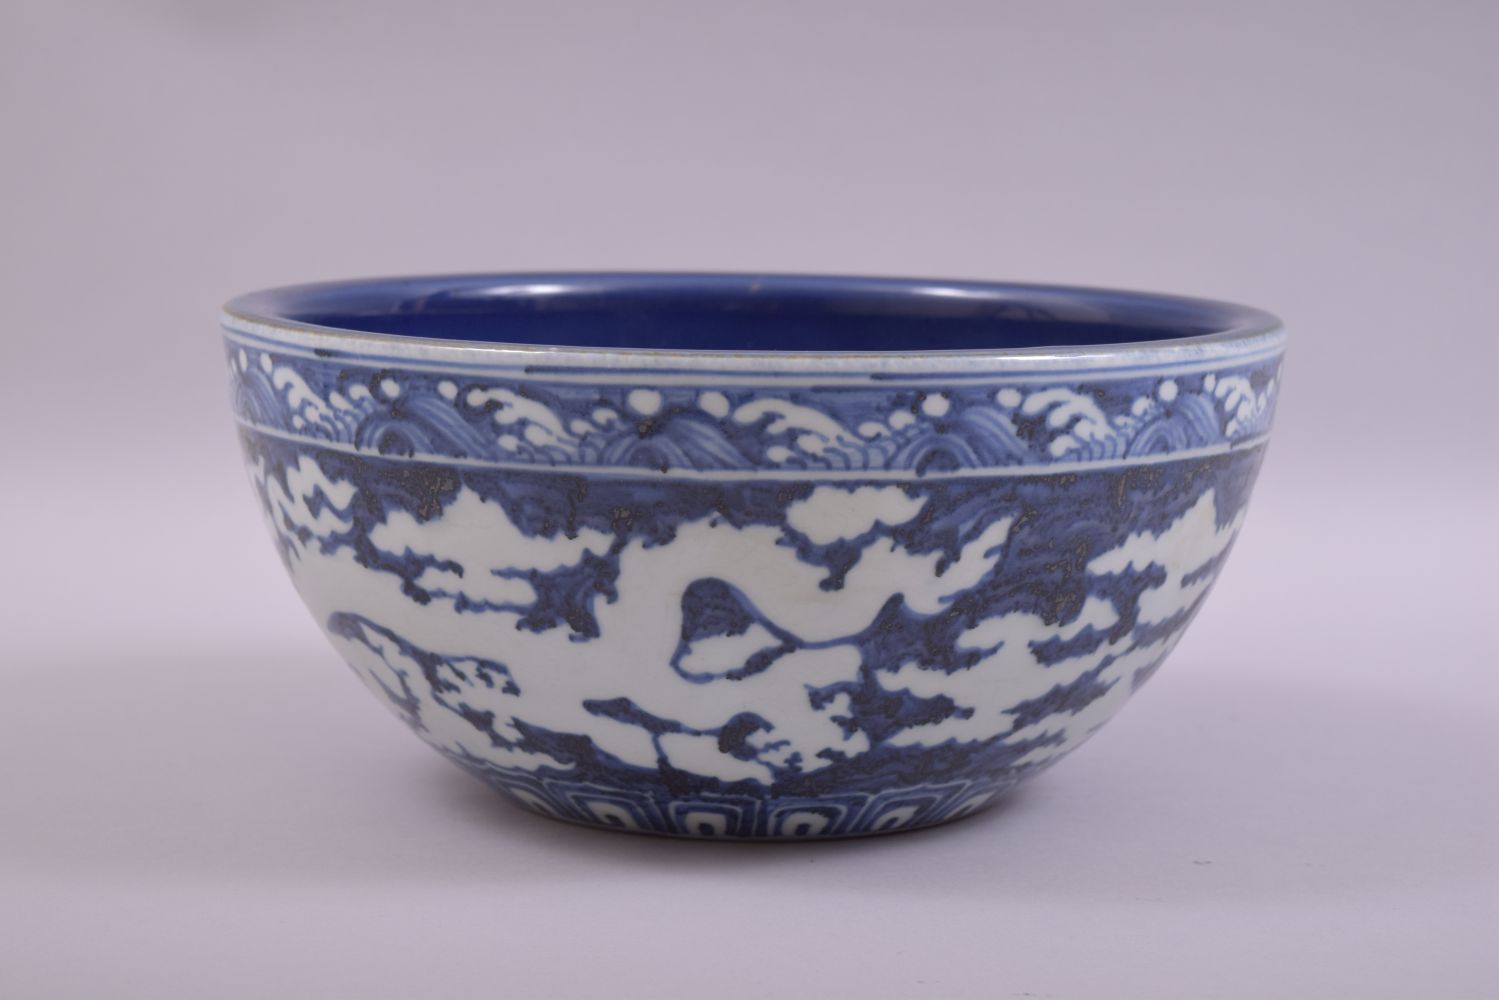 A LARGE CHINESE SACRIFICIAL BLUE GLAZE DRAGON BOWL, the exterior with white dragons and clouds - Image 3 of 7